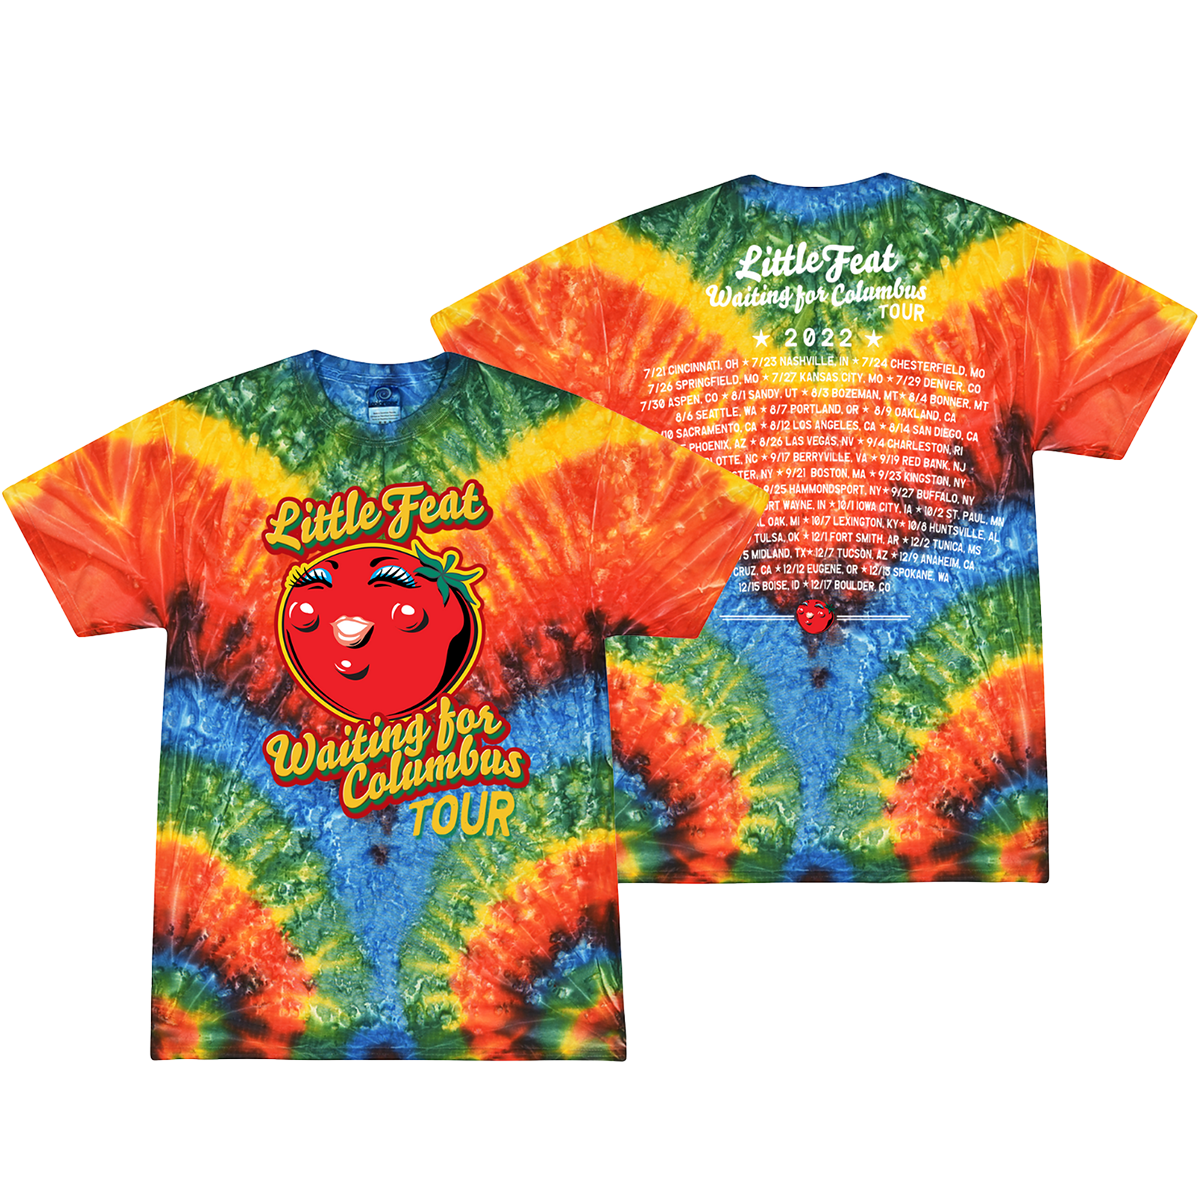 Waiting for Columbus Tie-Dye Tour Date Tee